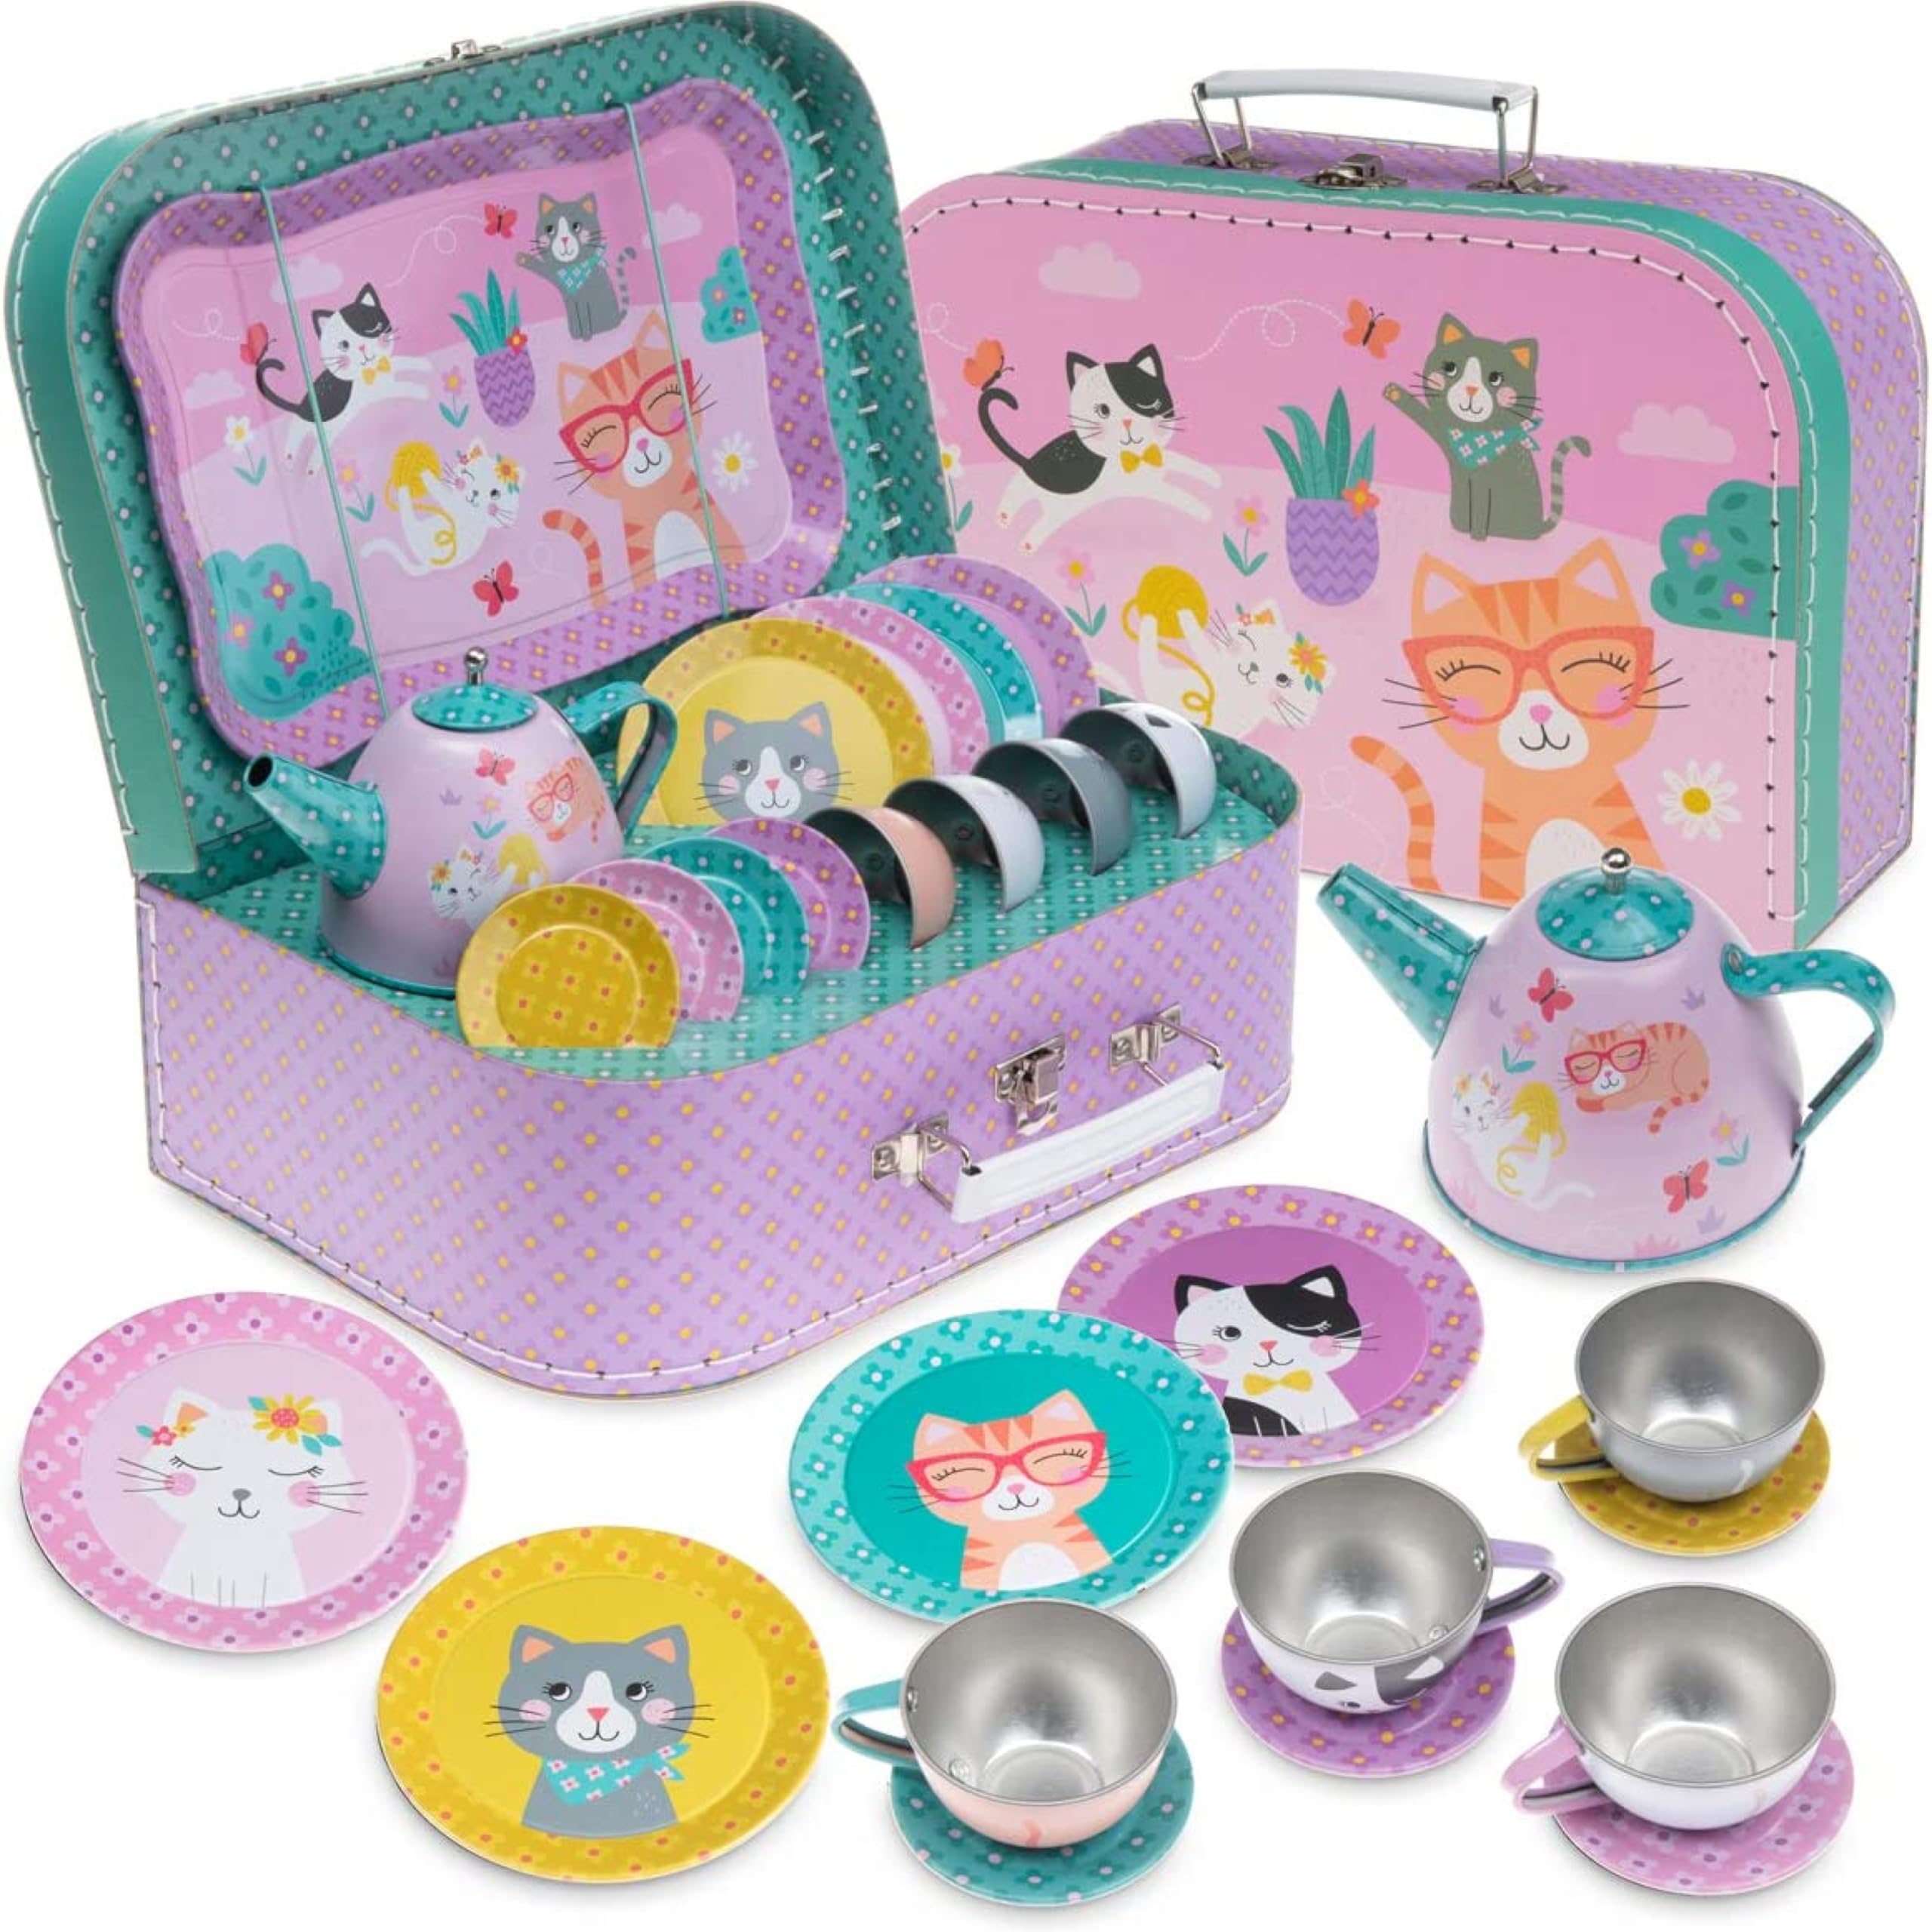 15-Piece Toy Tin (Cat, Ballerina or Llama) Tea Set with Case (Tea Pot, Cup, Tray, Saucers, Plates)  $13.49 + Free Shipping w/ Prime or on $35+